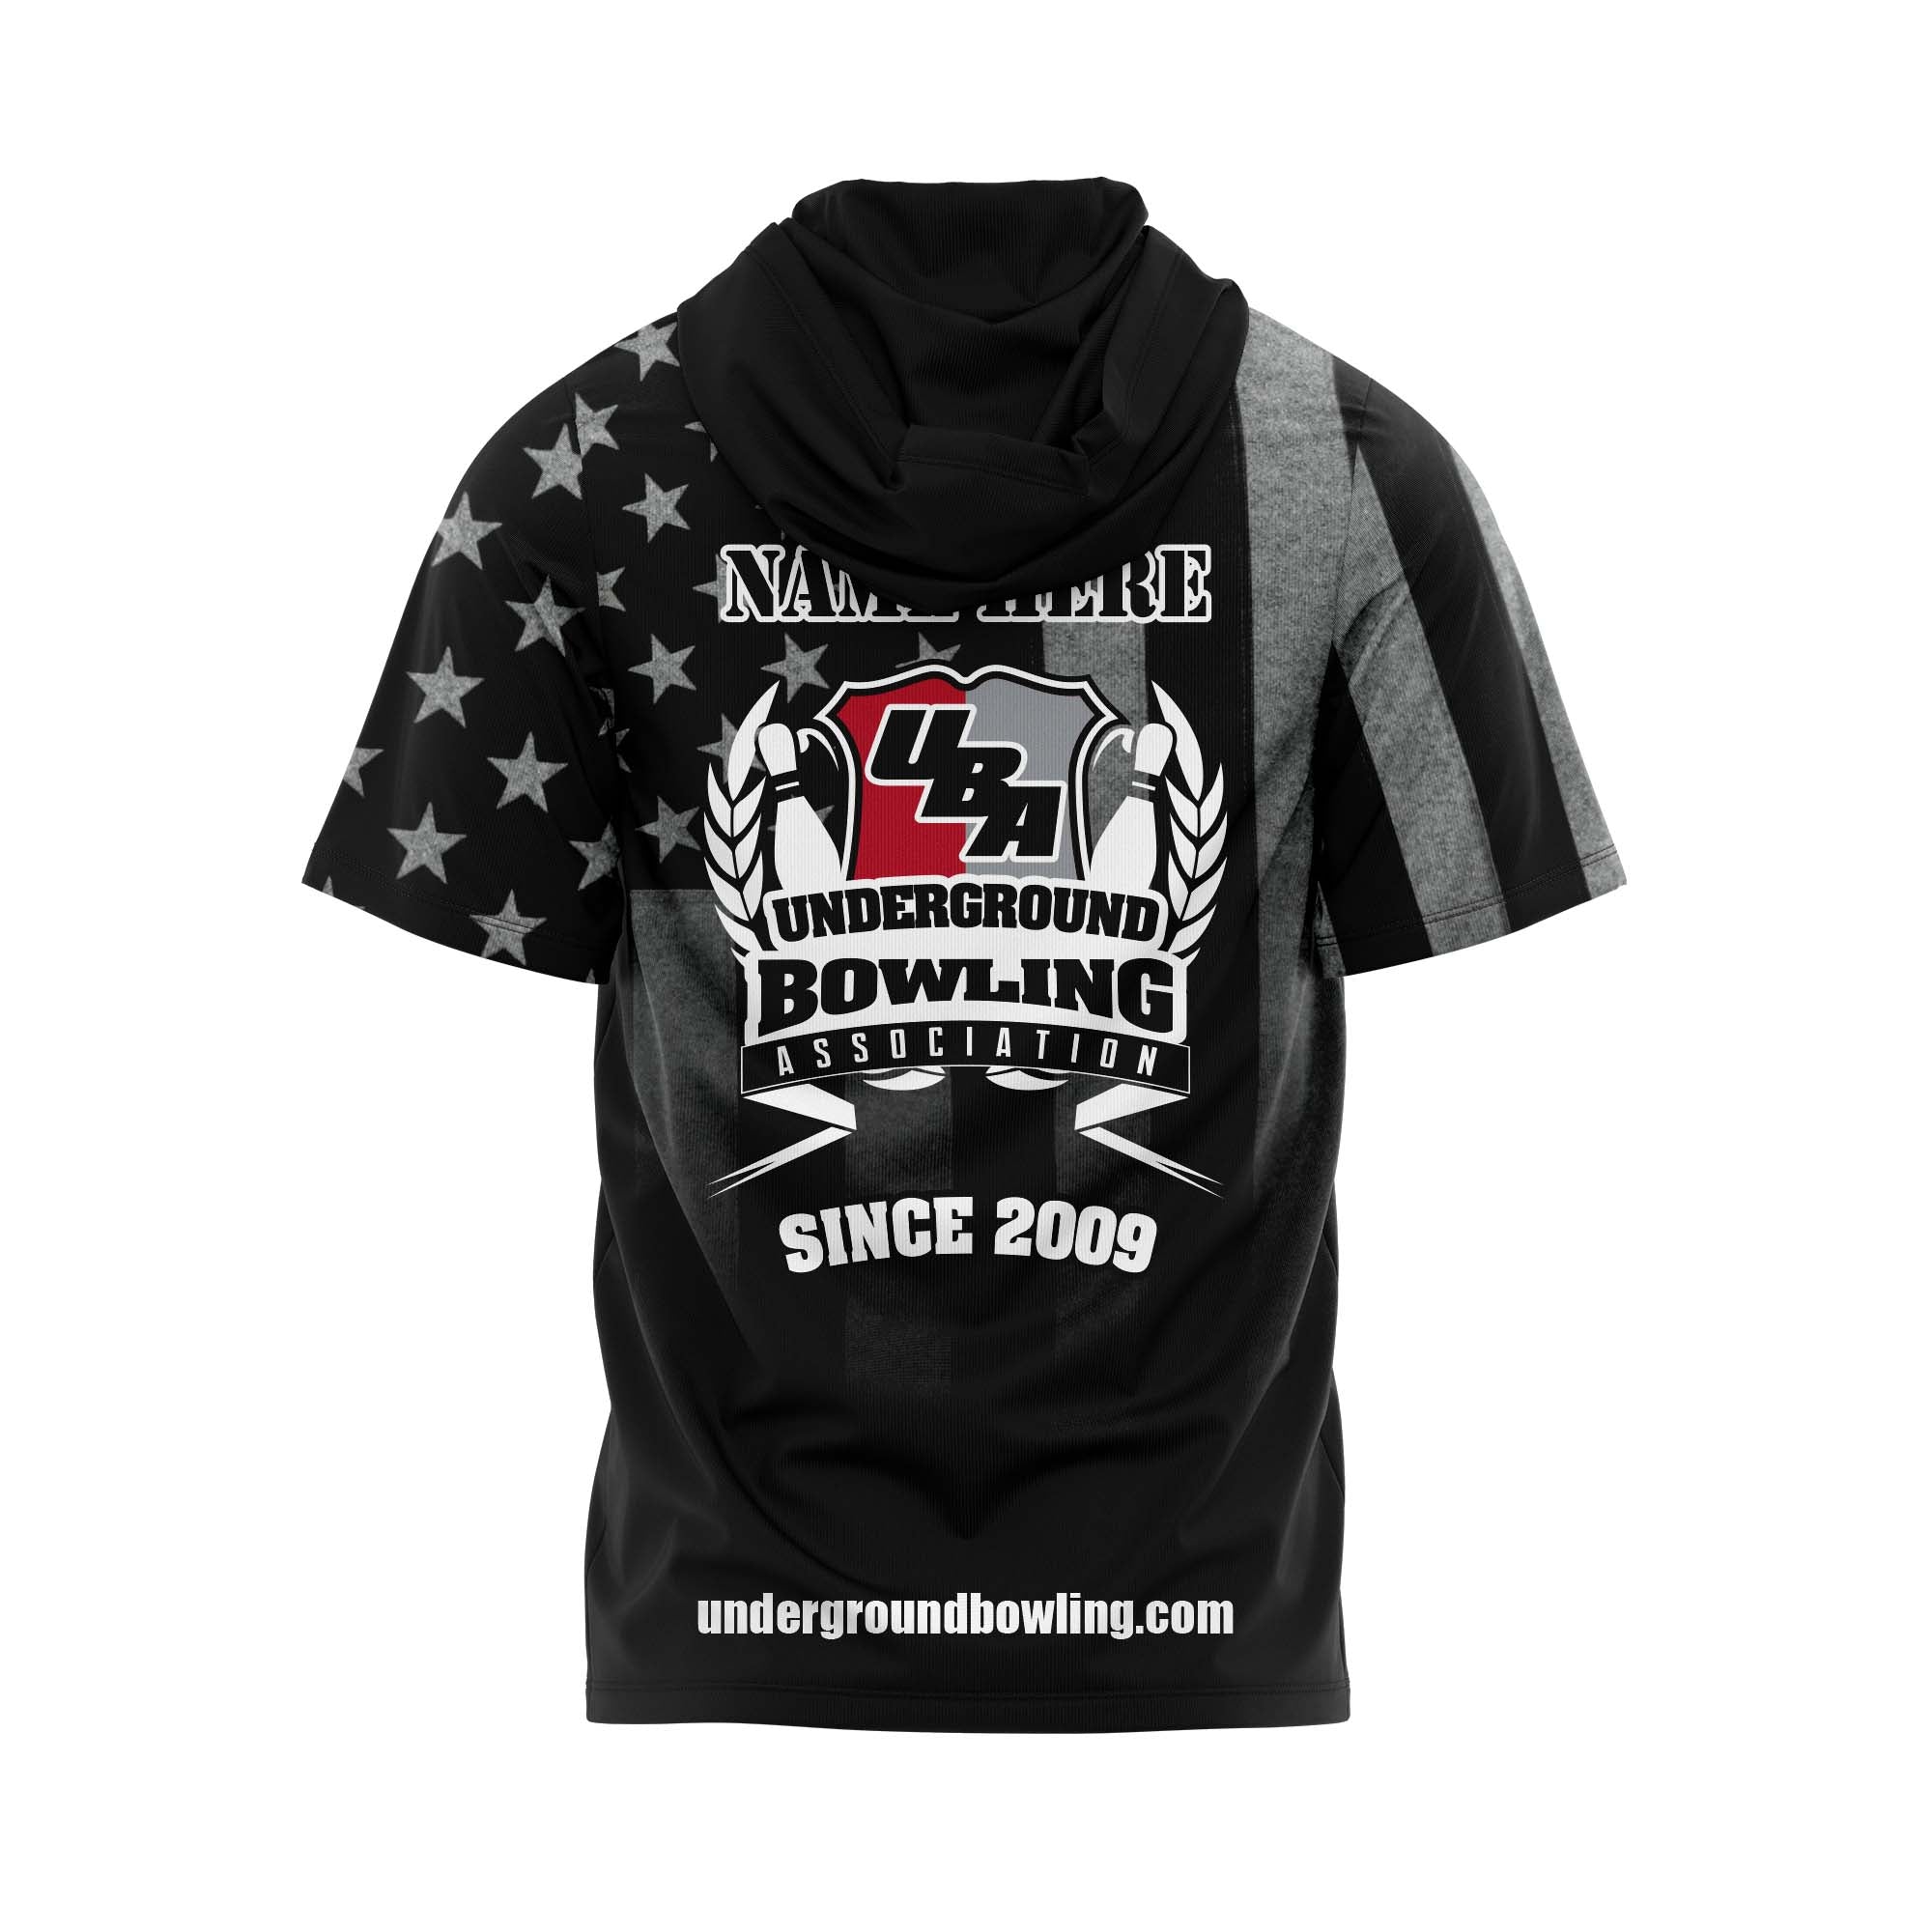 Special Ops Flag Jersey